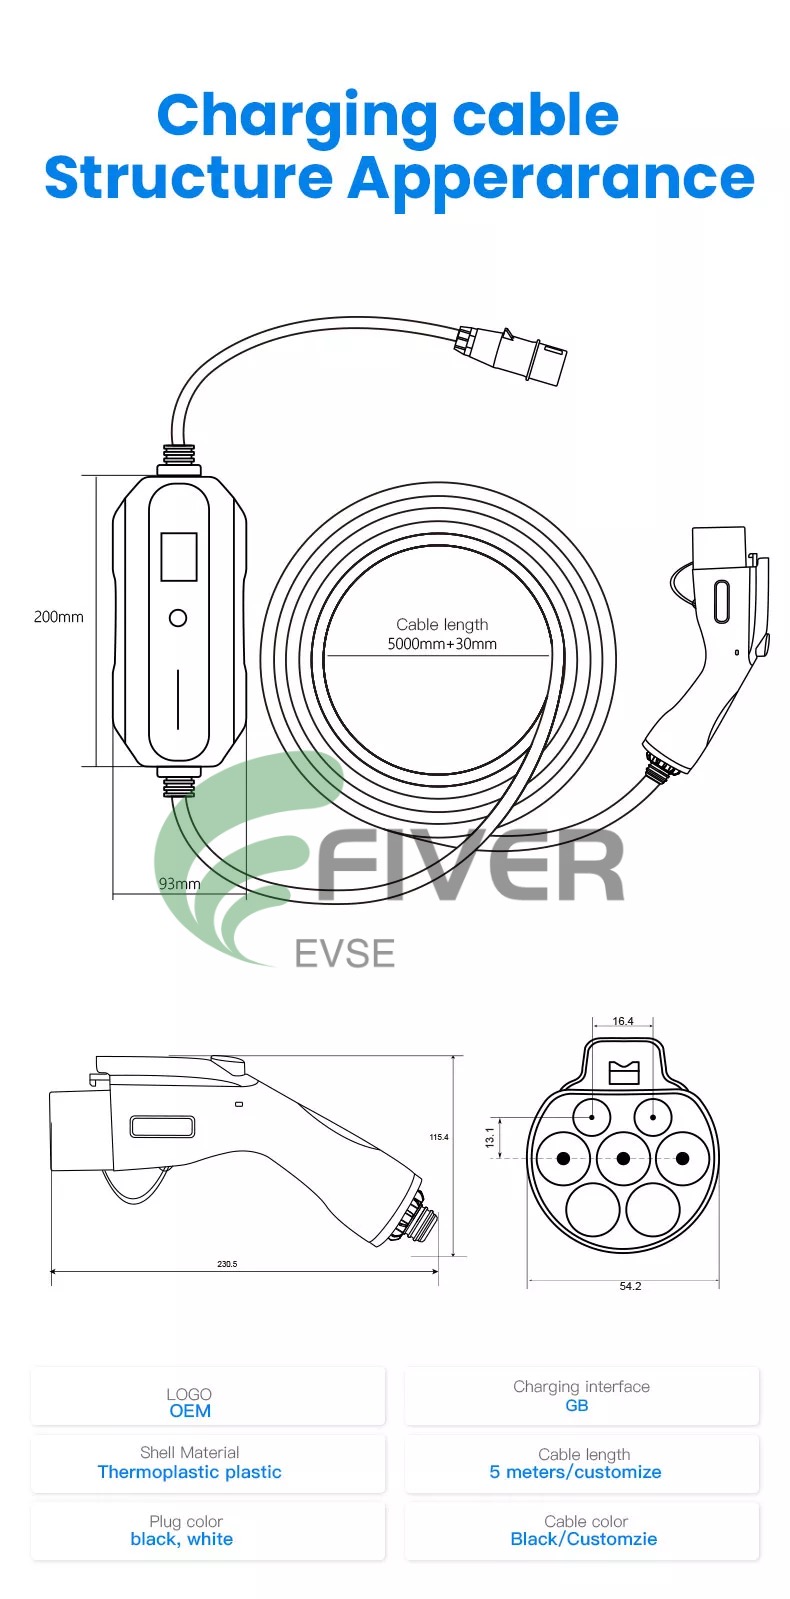 drawings for GBT <a href=https://fiverevse.com/Level-2--Portable--EV--Chargers.html target='_blank'>Portable EV Charger</a>s